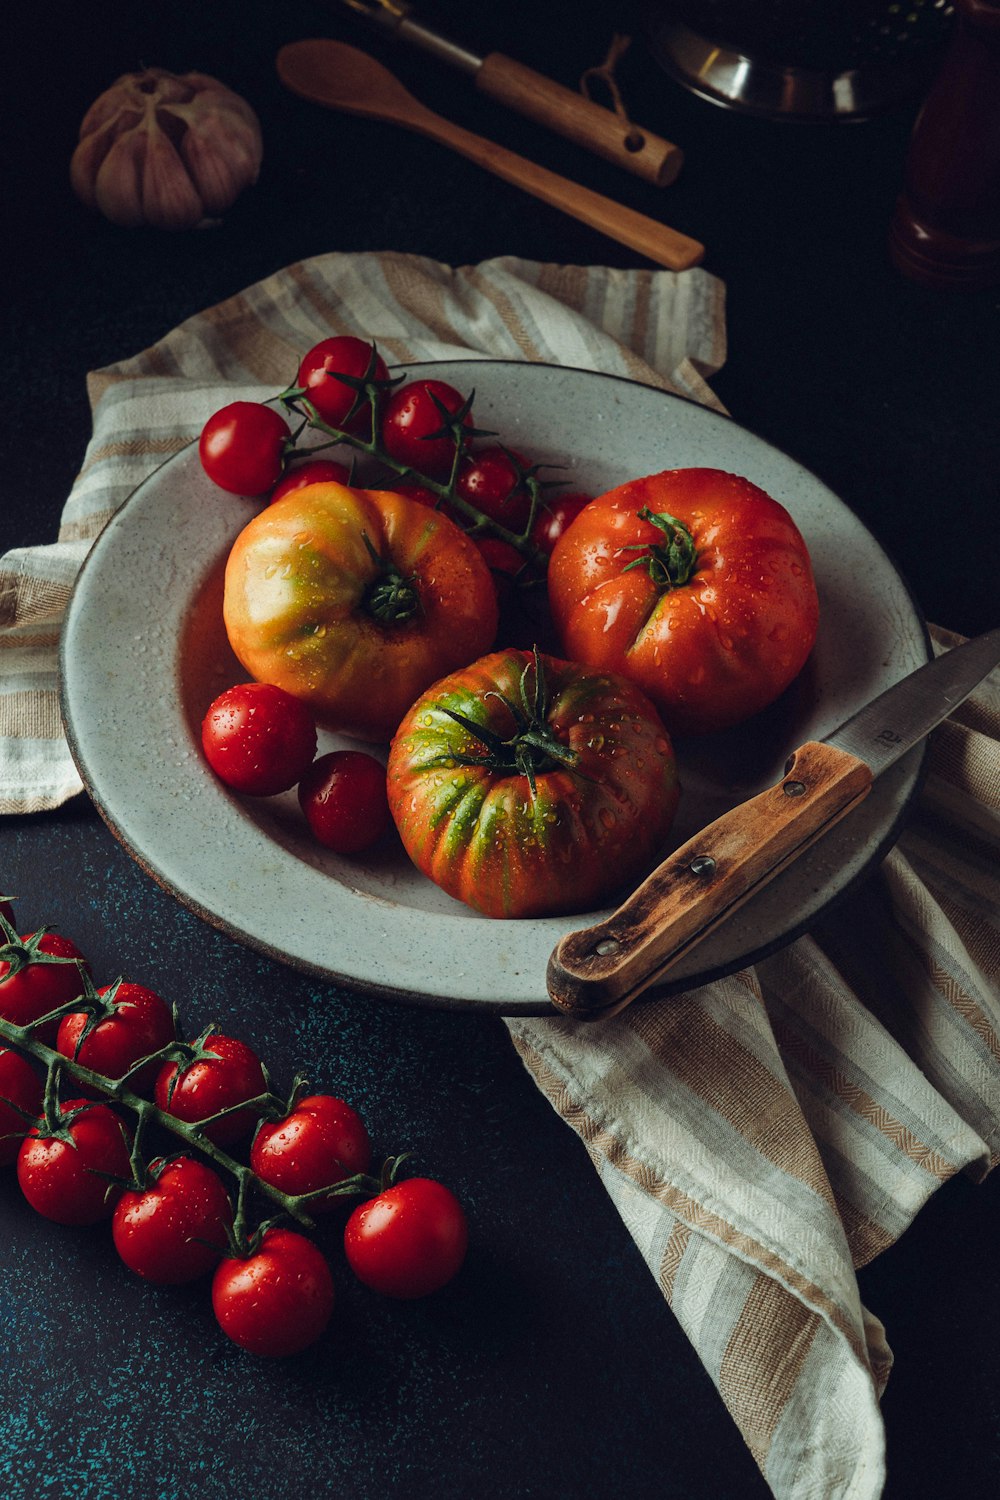 a plate of tomatoes and a knife on a table